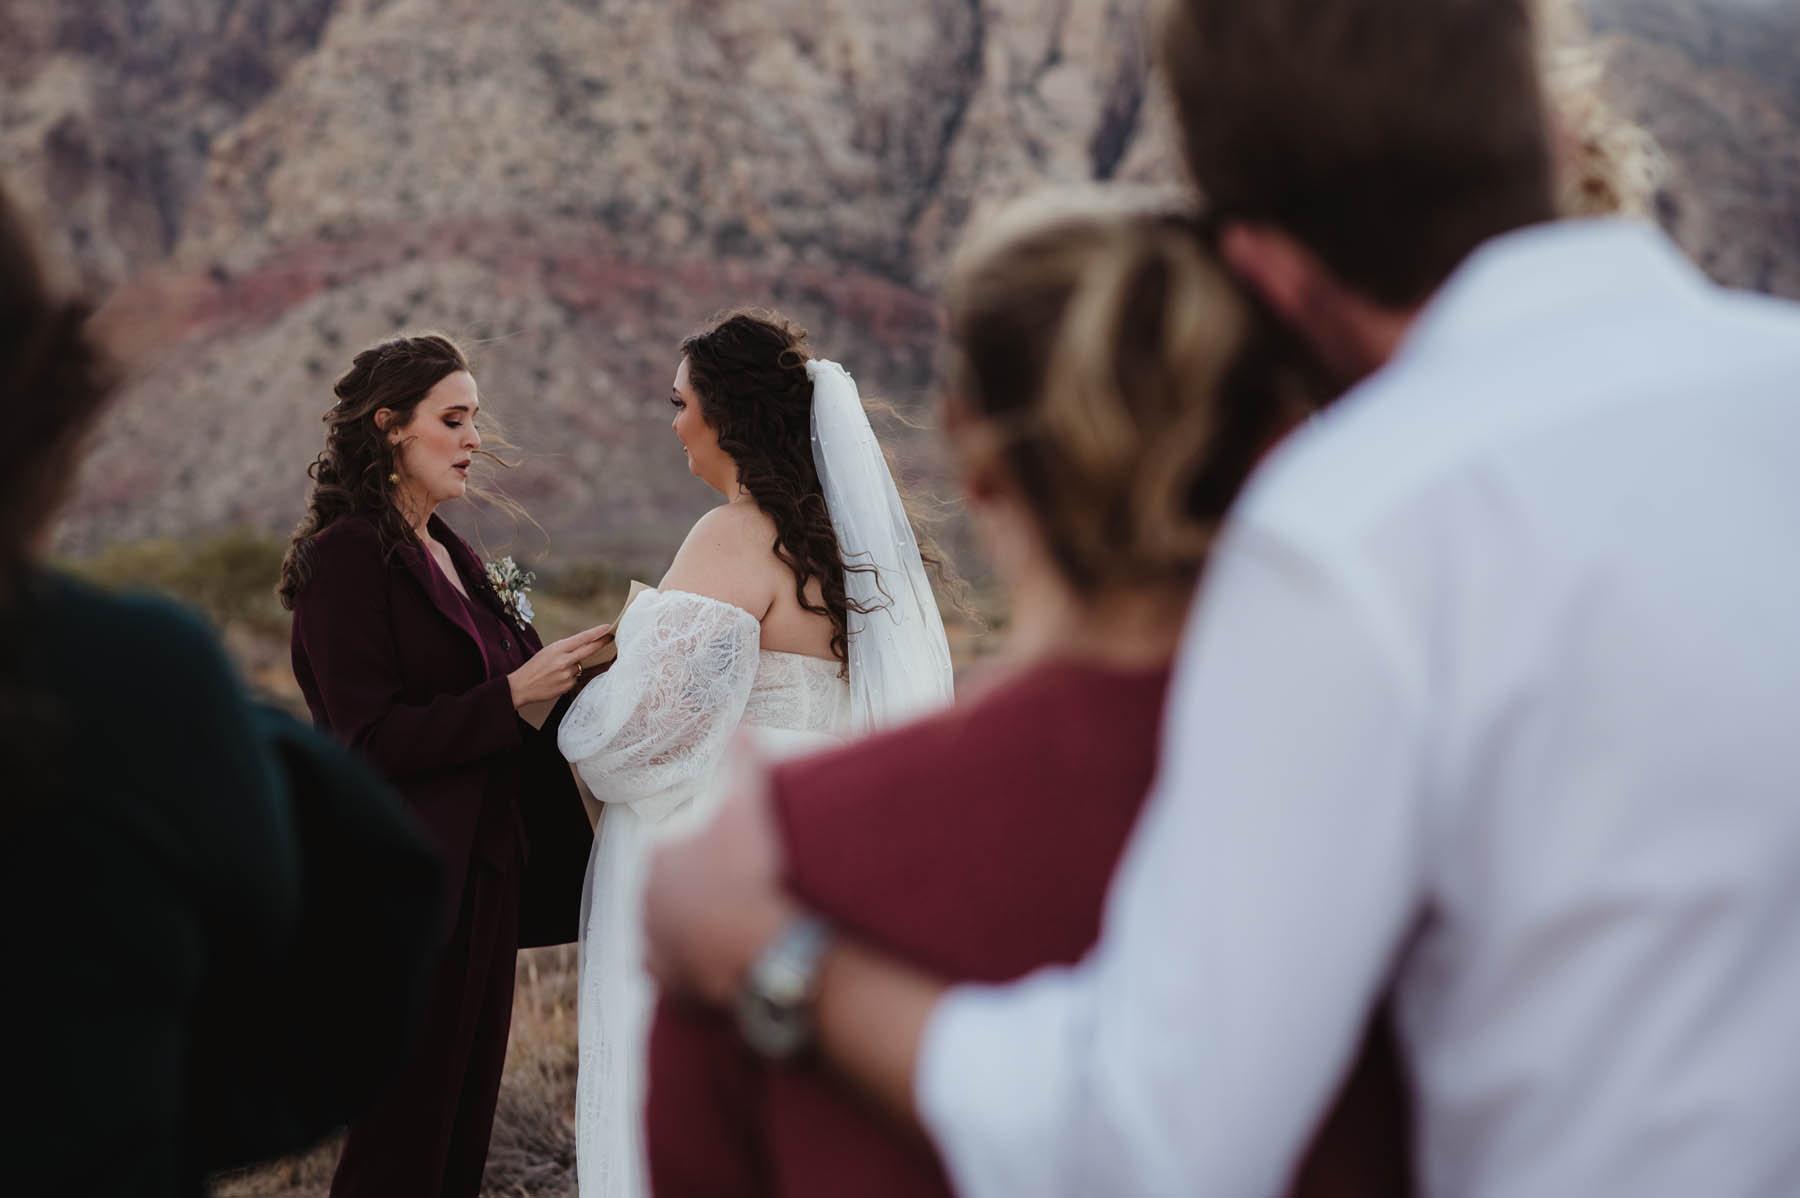 Two brunettes read vows to each other in a desert, with two people in the blurry foreground.